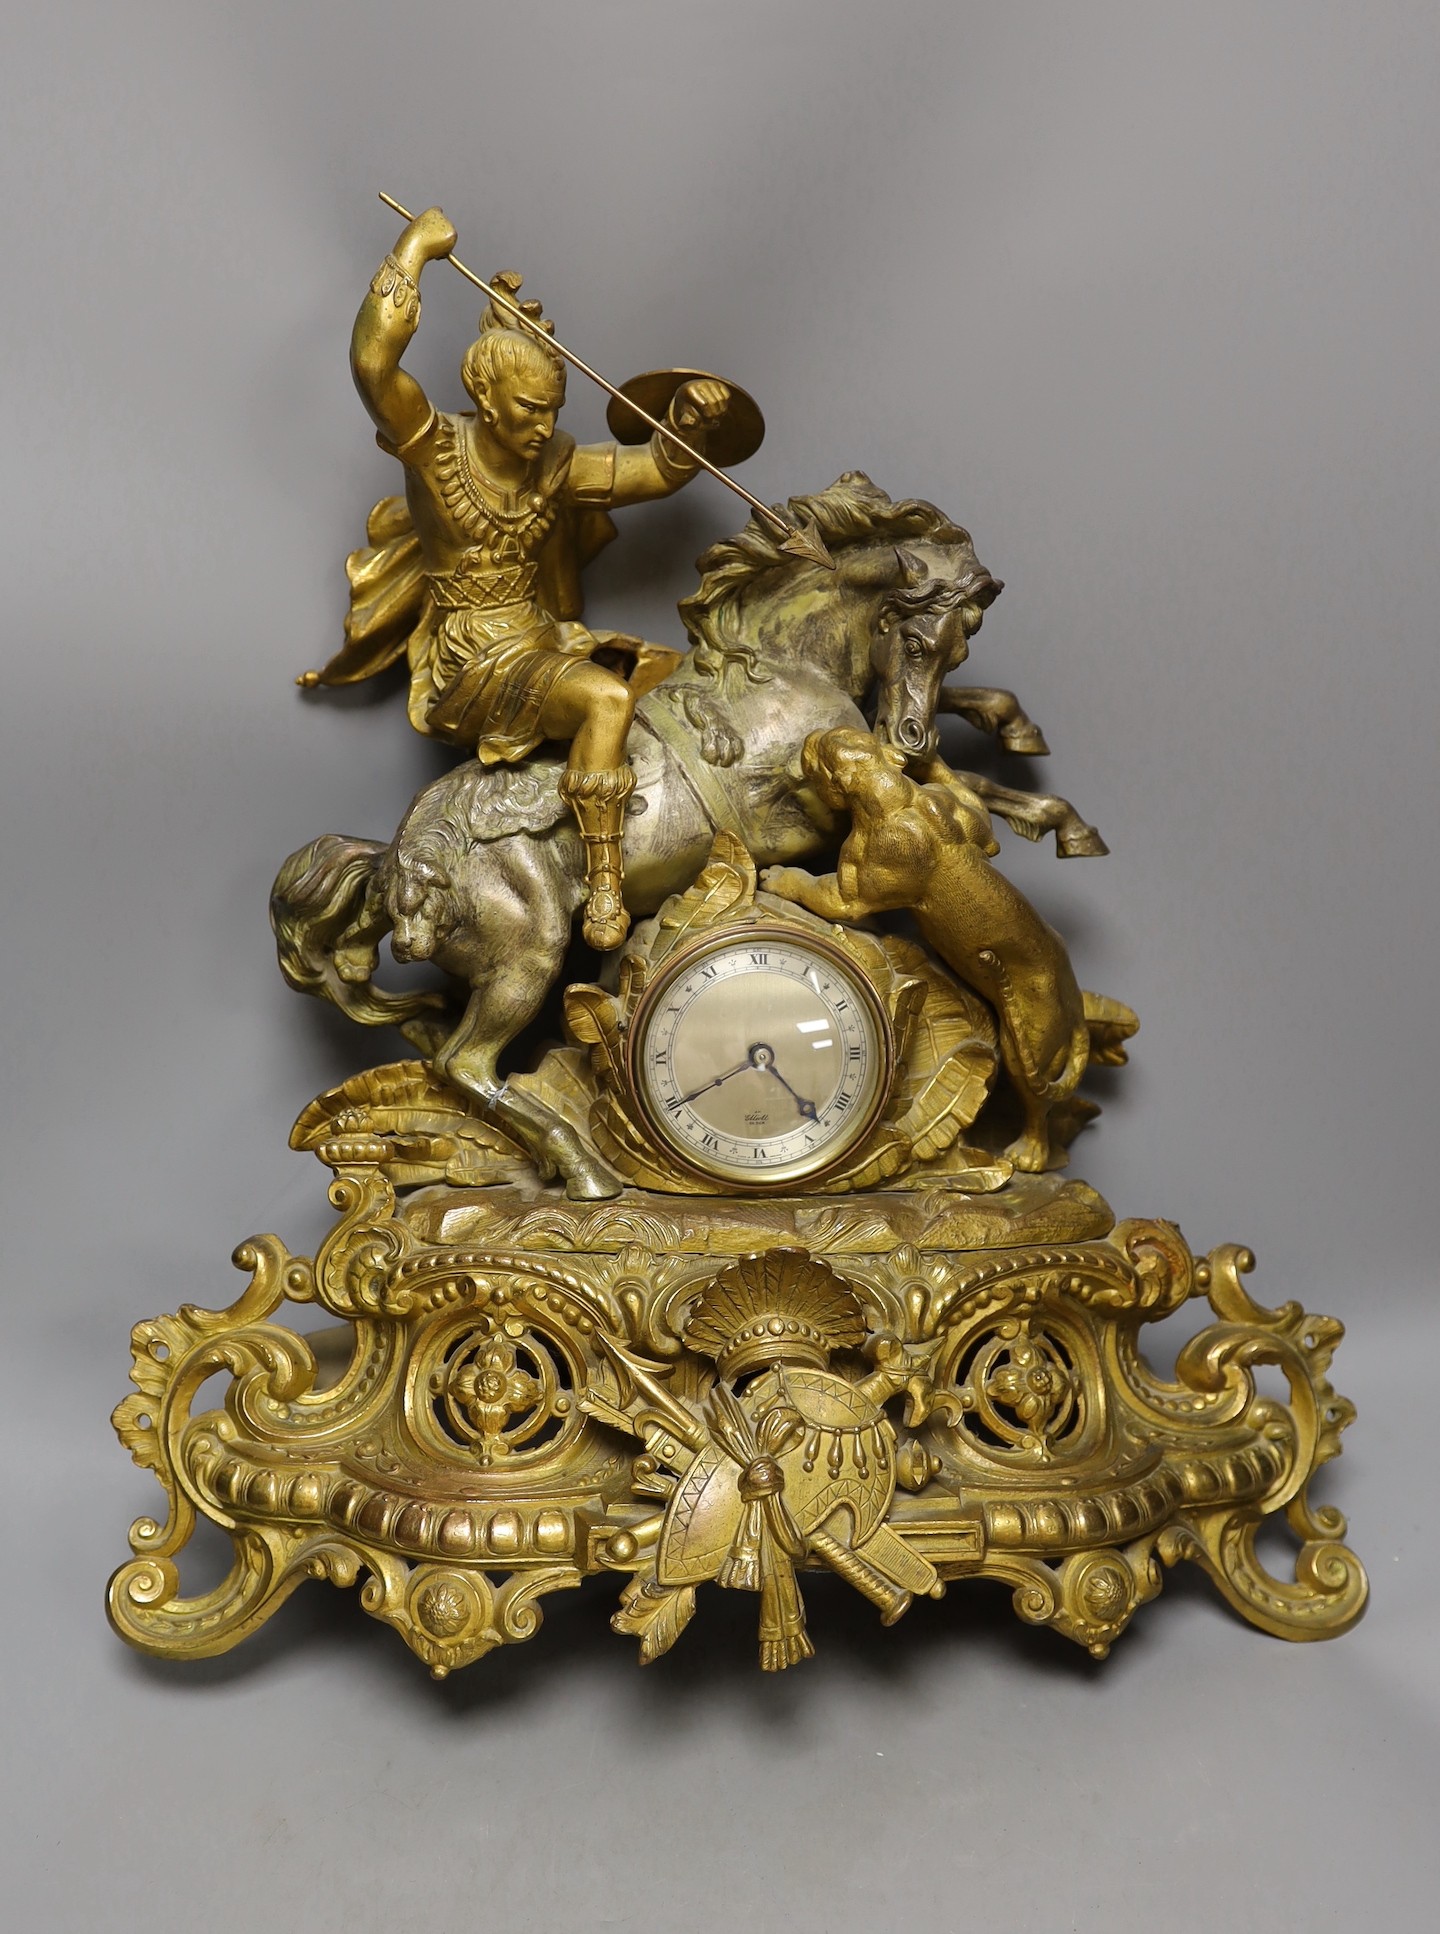 A 19th century spelter mantle clock with later Elliot dial and movement